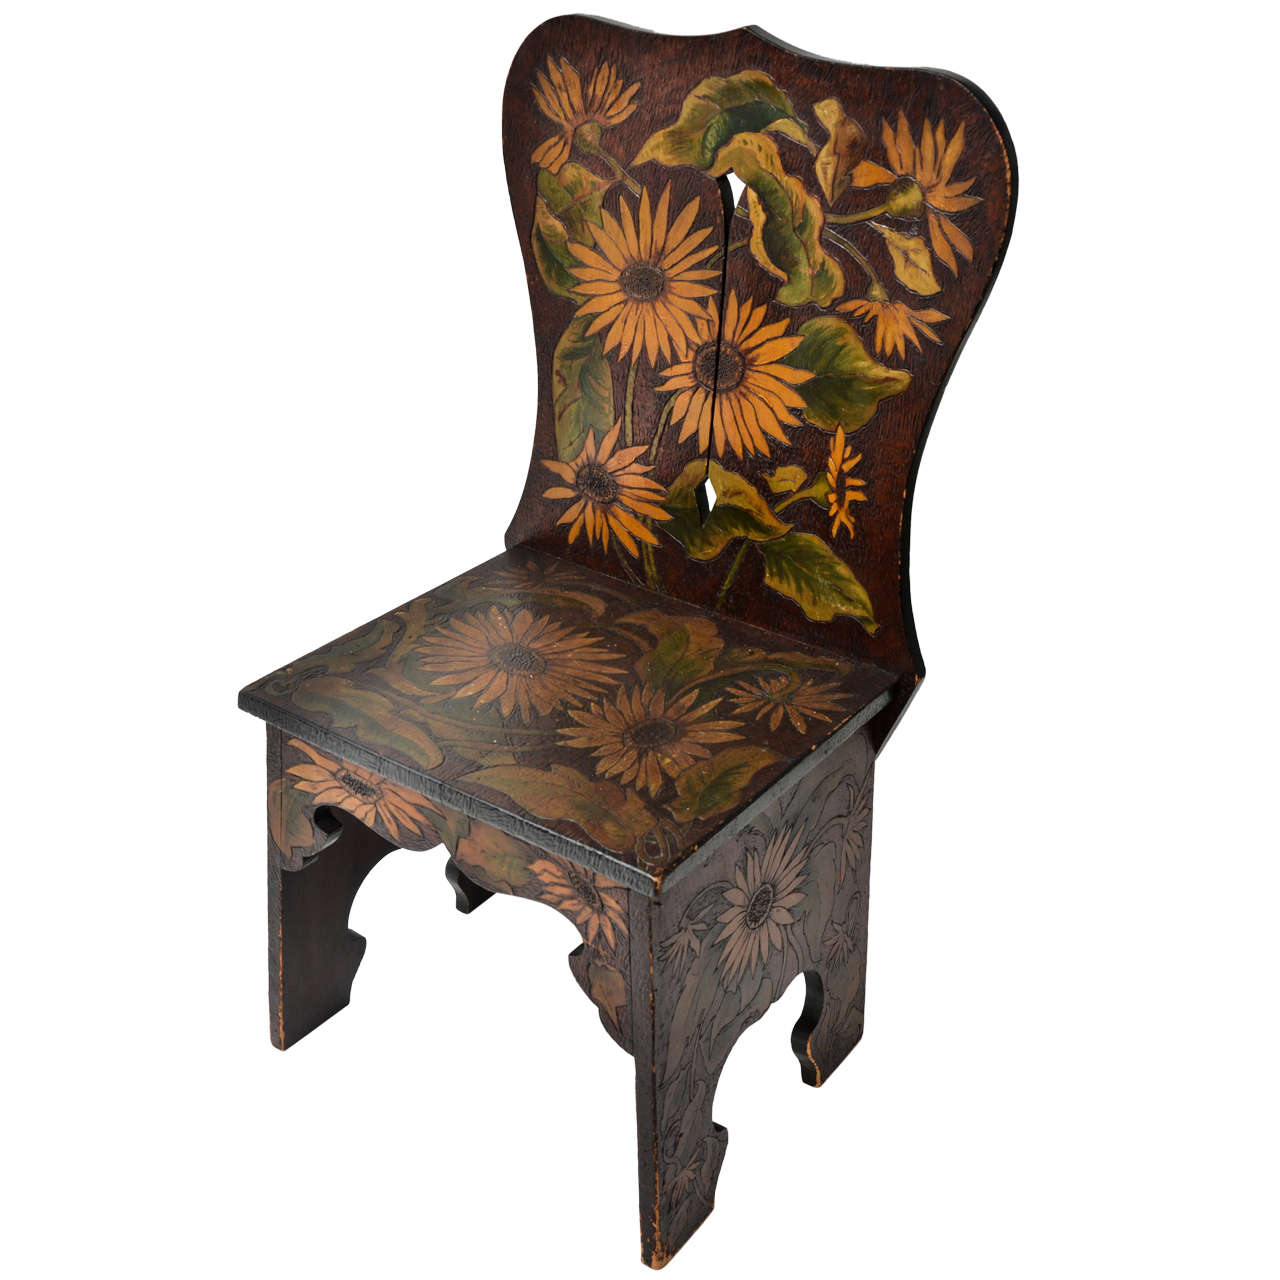 Sculptural Wood Side Chair with Pyrography & Painted Sunflower Ornament For Sale